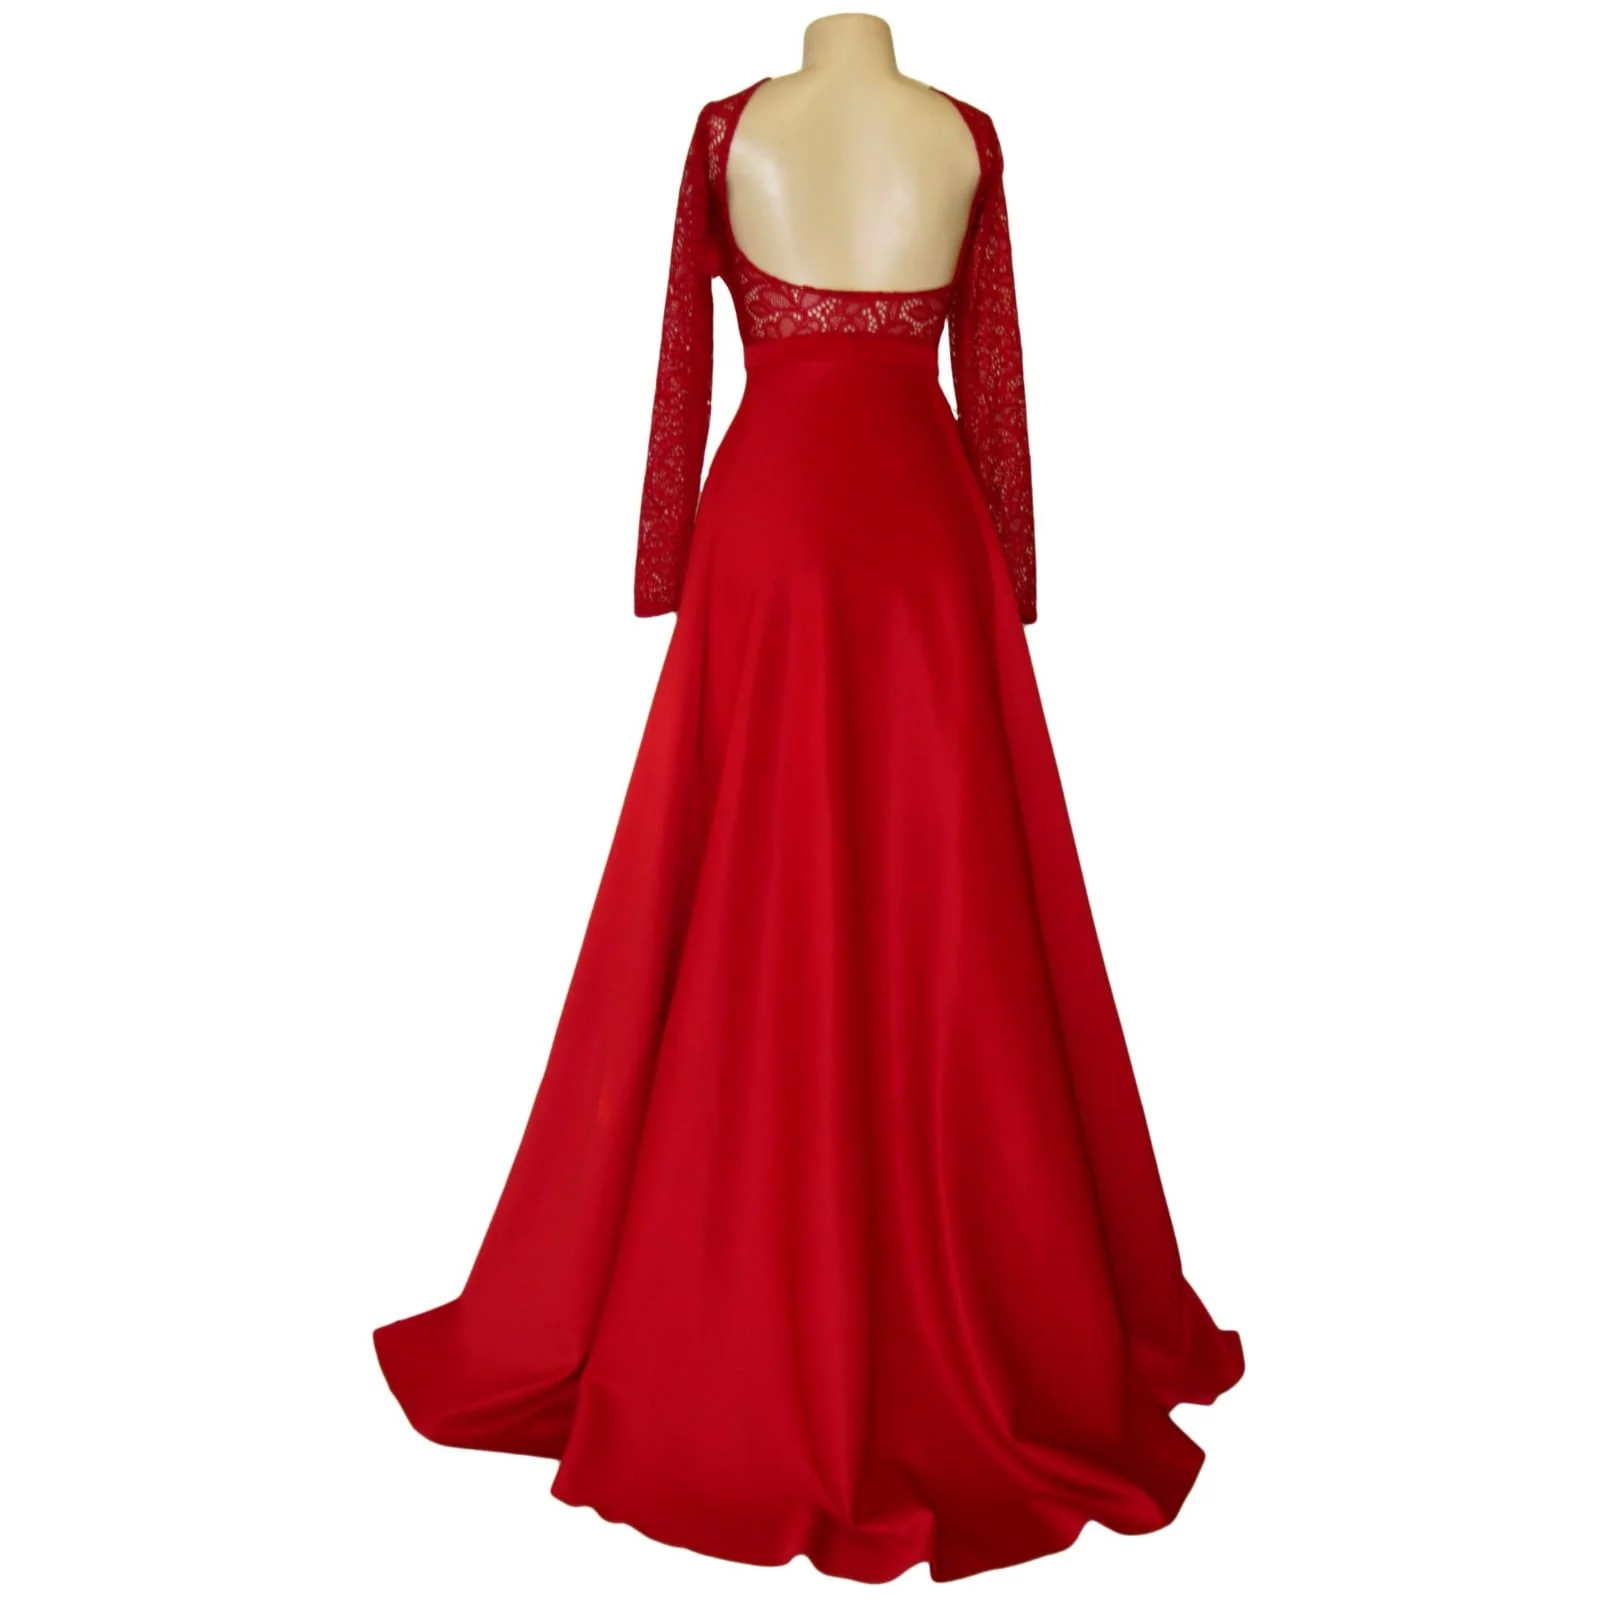 Straight cut deep red open back gala dress 2 straight cut deep red open back gala dress. With a lace bodice, long lace sleeves and a slit. With a detachable train.